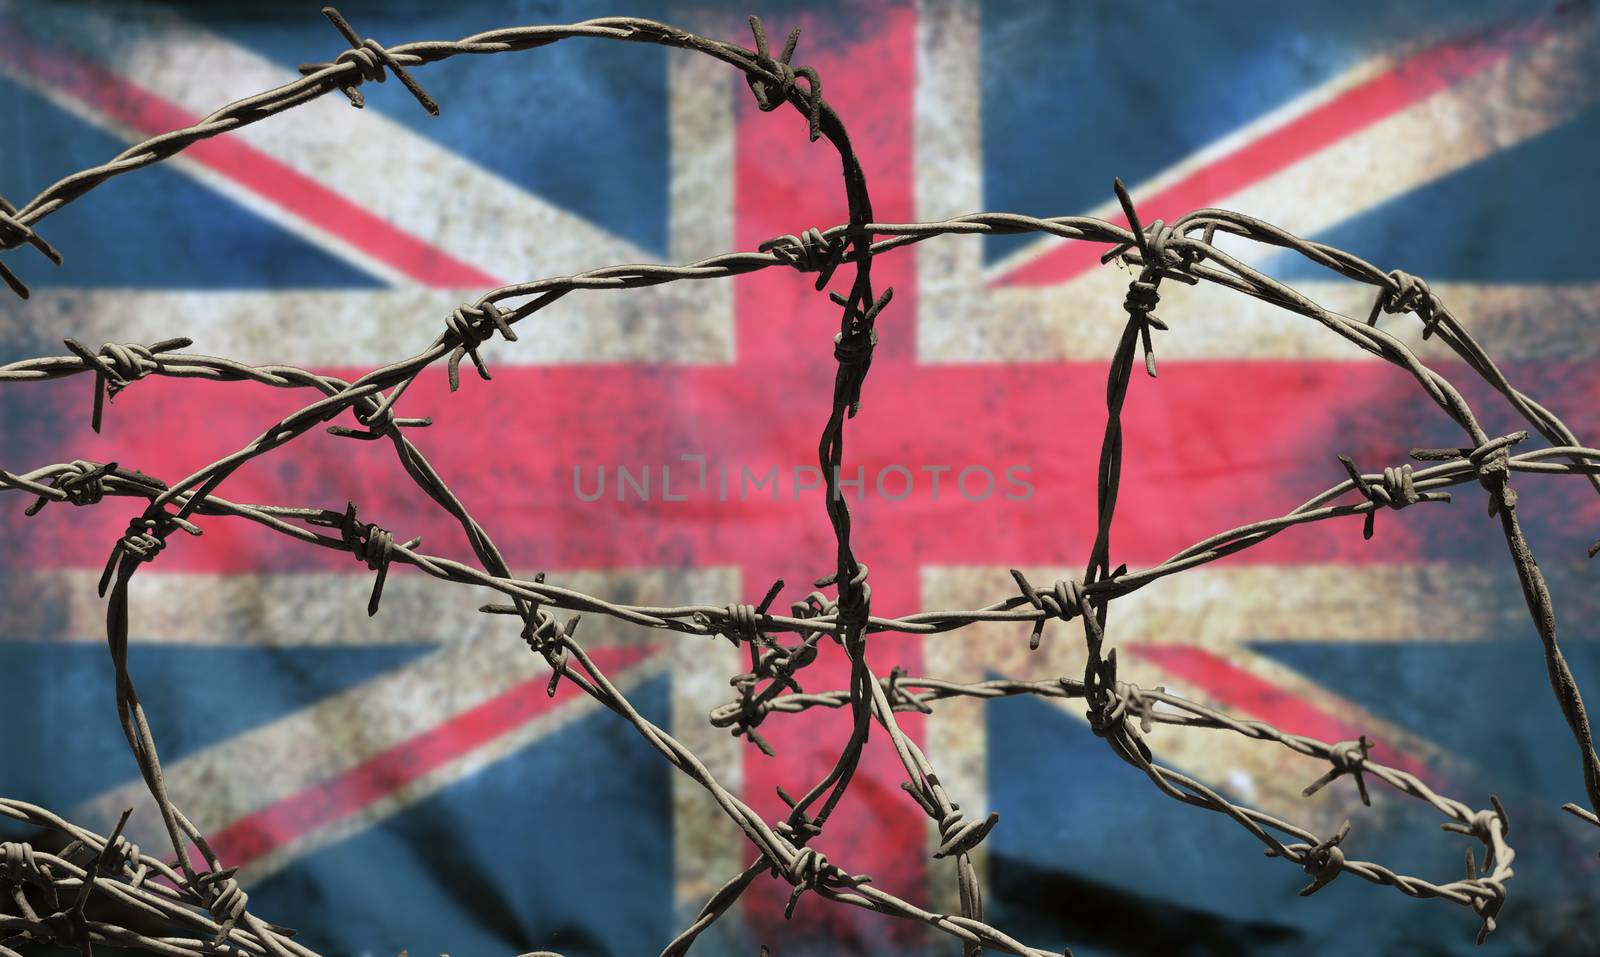 barbed wire in front of an old stained dirty union jack british flag with dark crumpled edges brexit freedom of movement isolationist concept